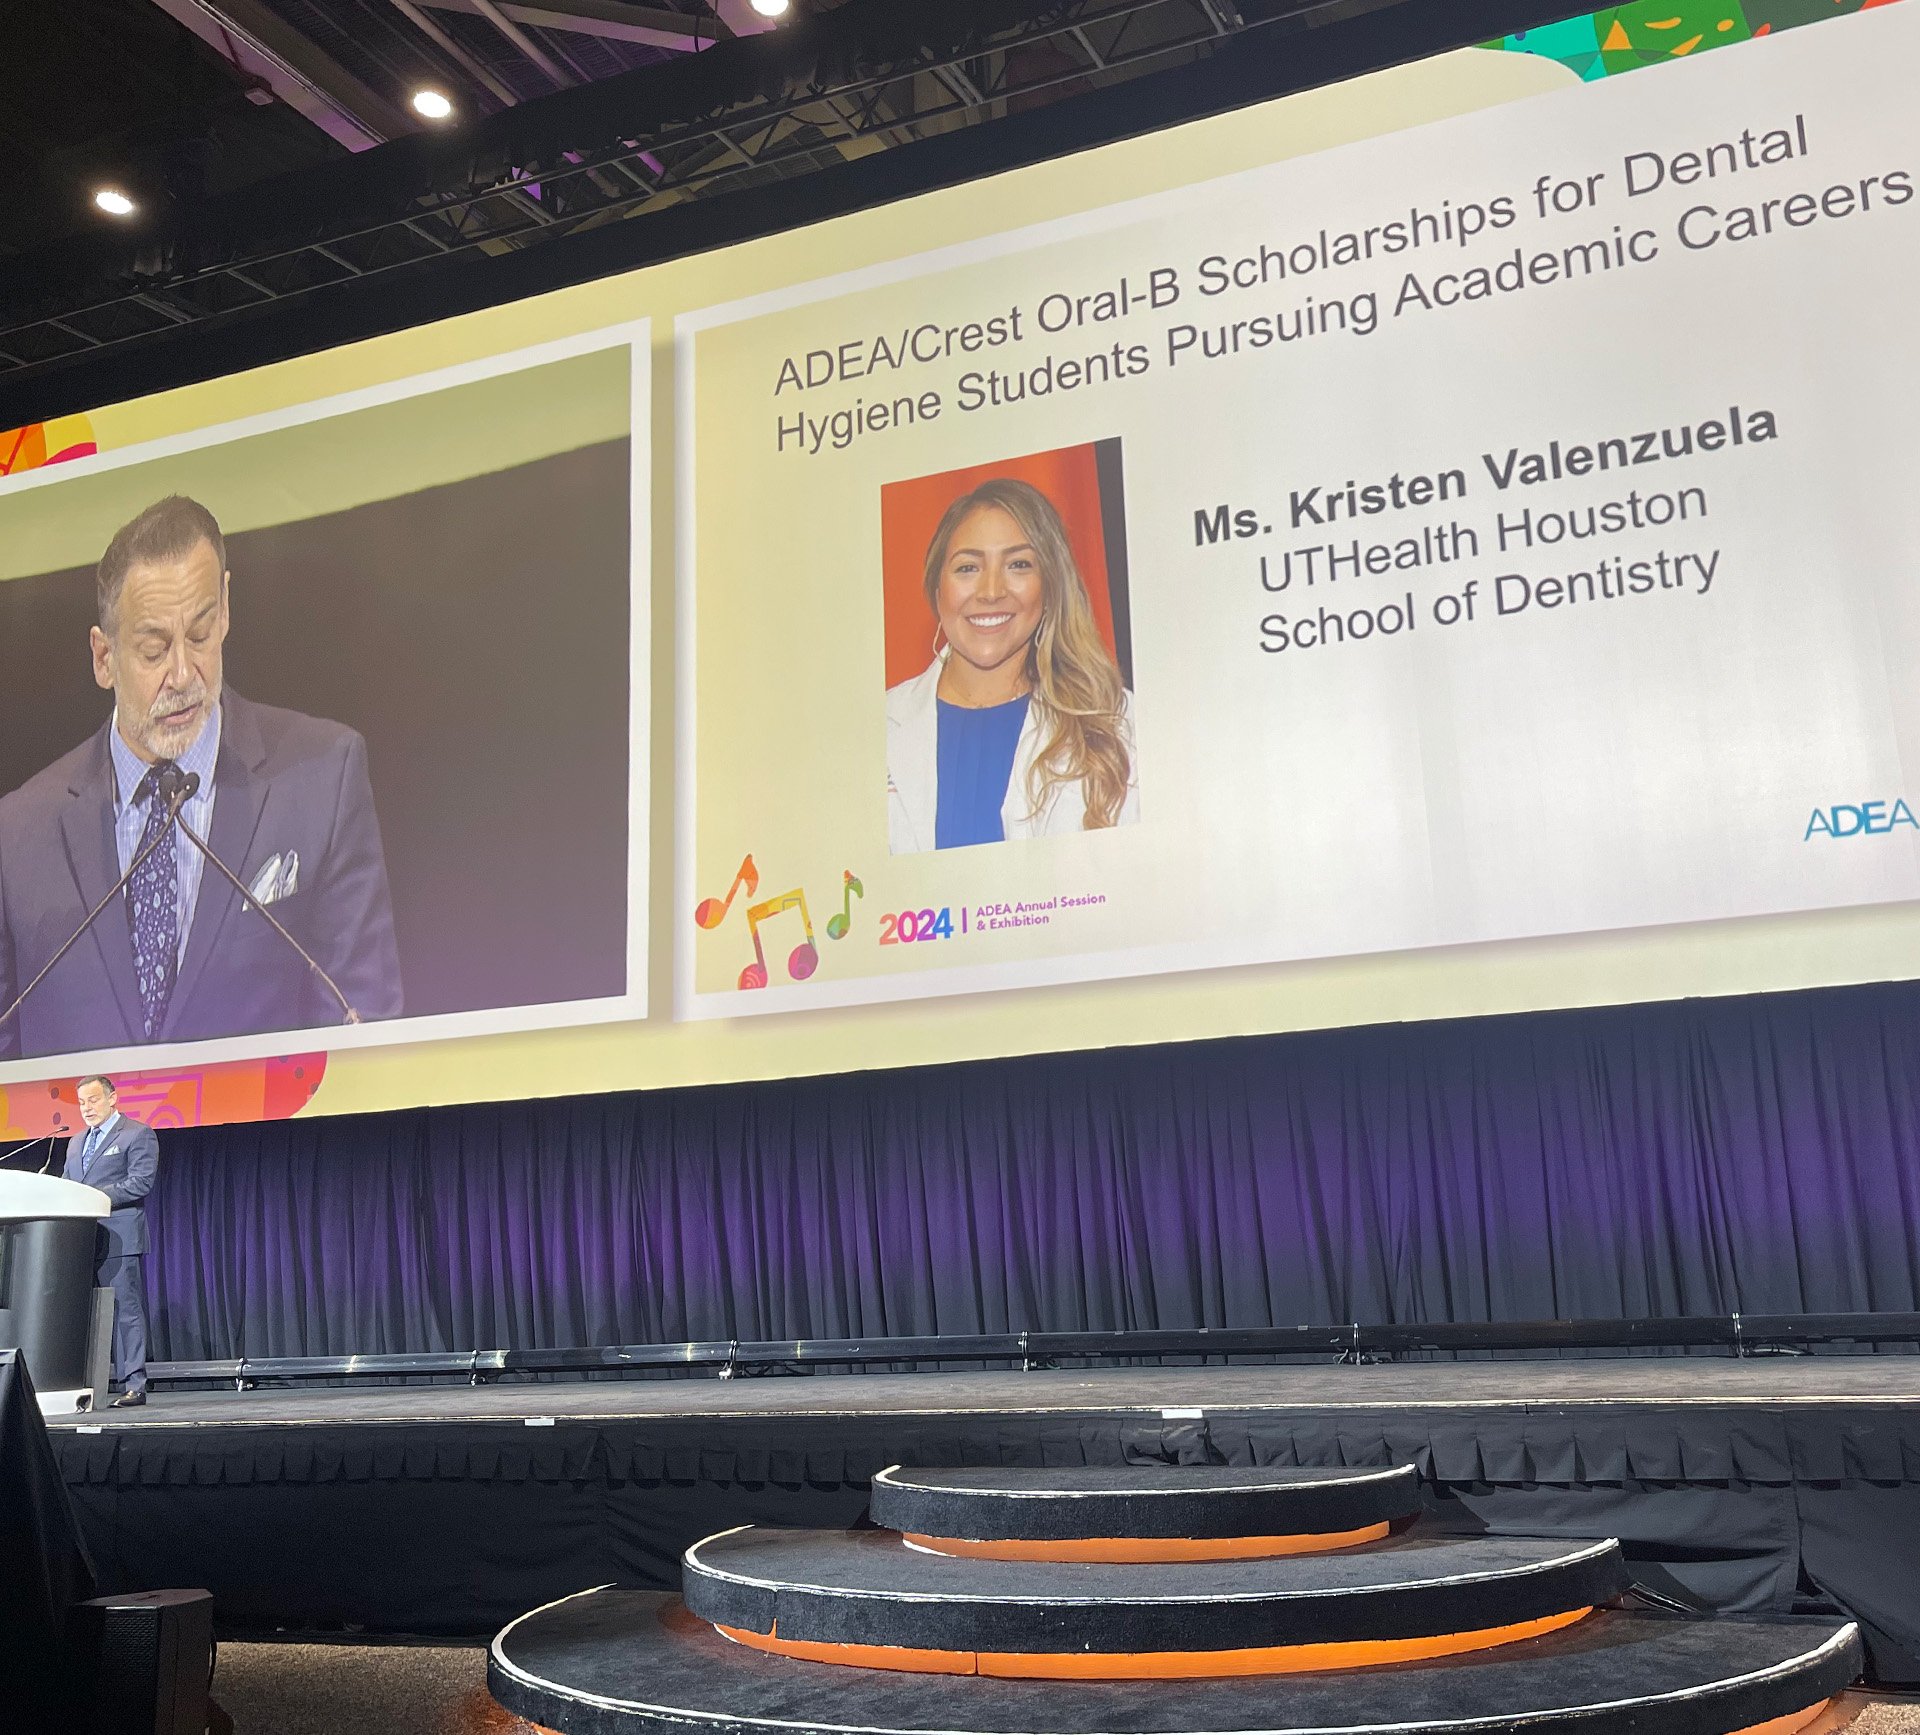 Kristen Valenzuela, MSDH candidate, announced as a the 2024 recipient of the ADEA/Crest Oral-B Scholarship for Dental Hygiene Students Pursuing Academic Careers, one of two scholarships she received at the ADEA Annual Session.